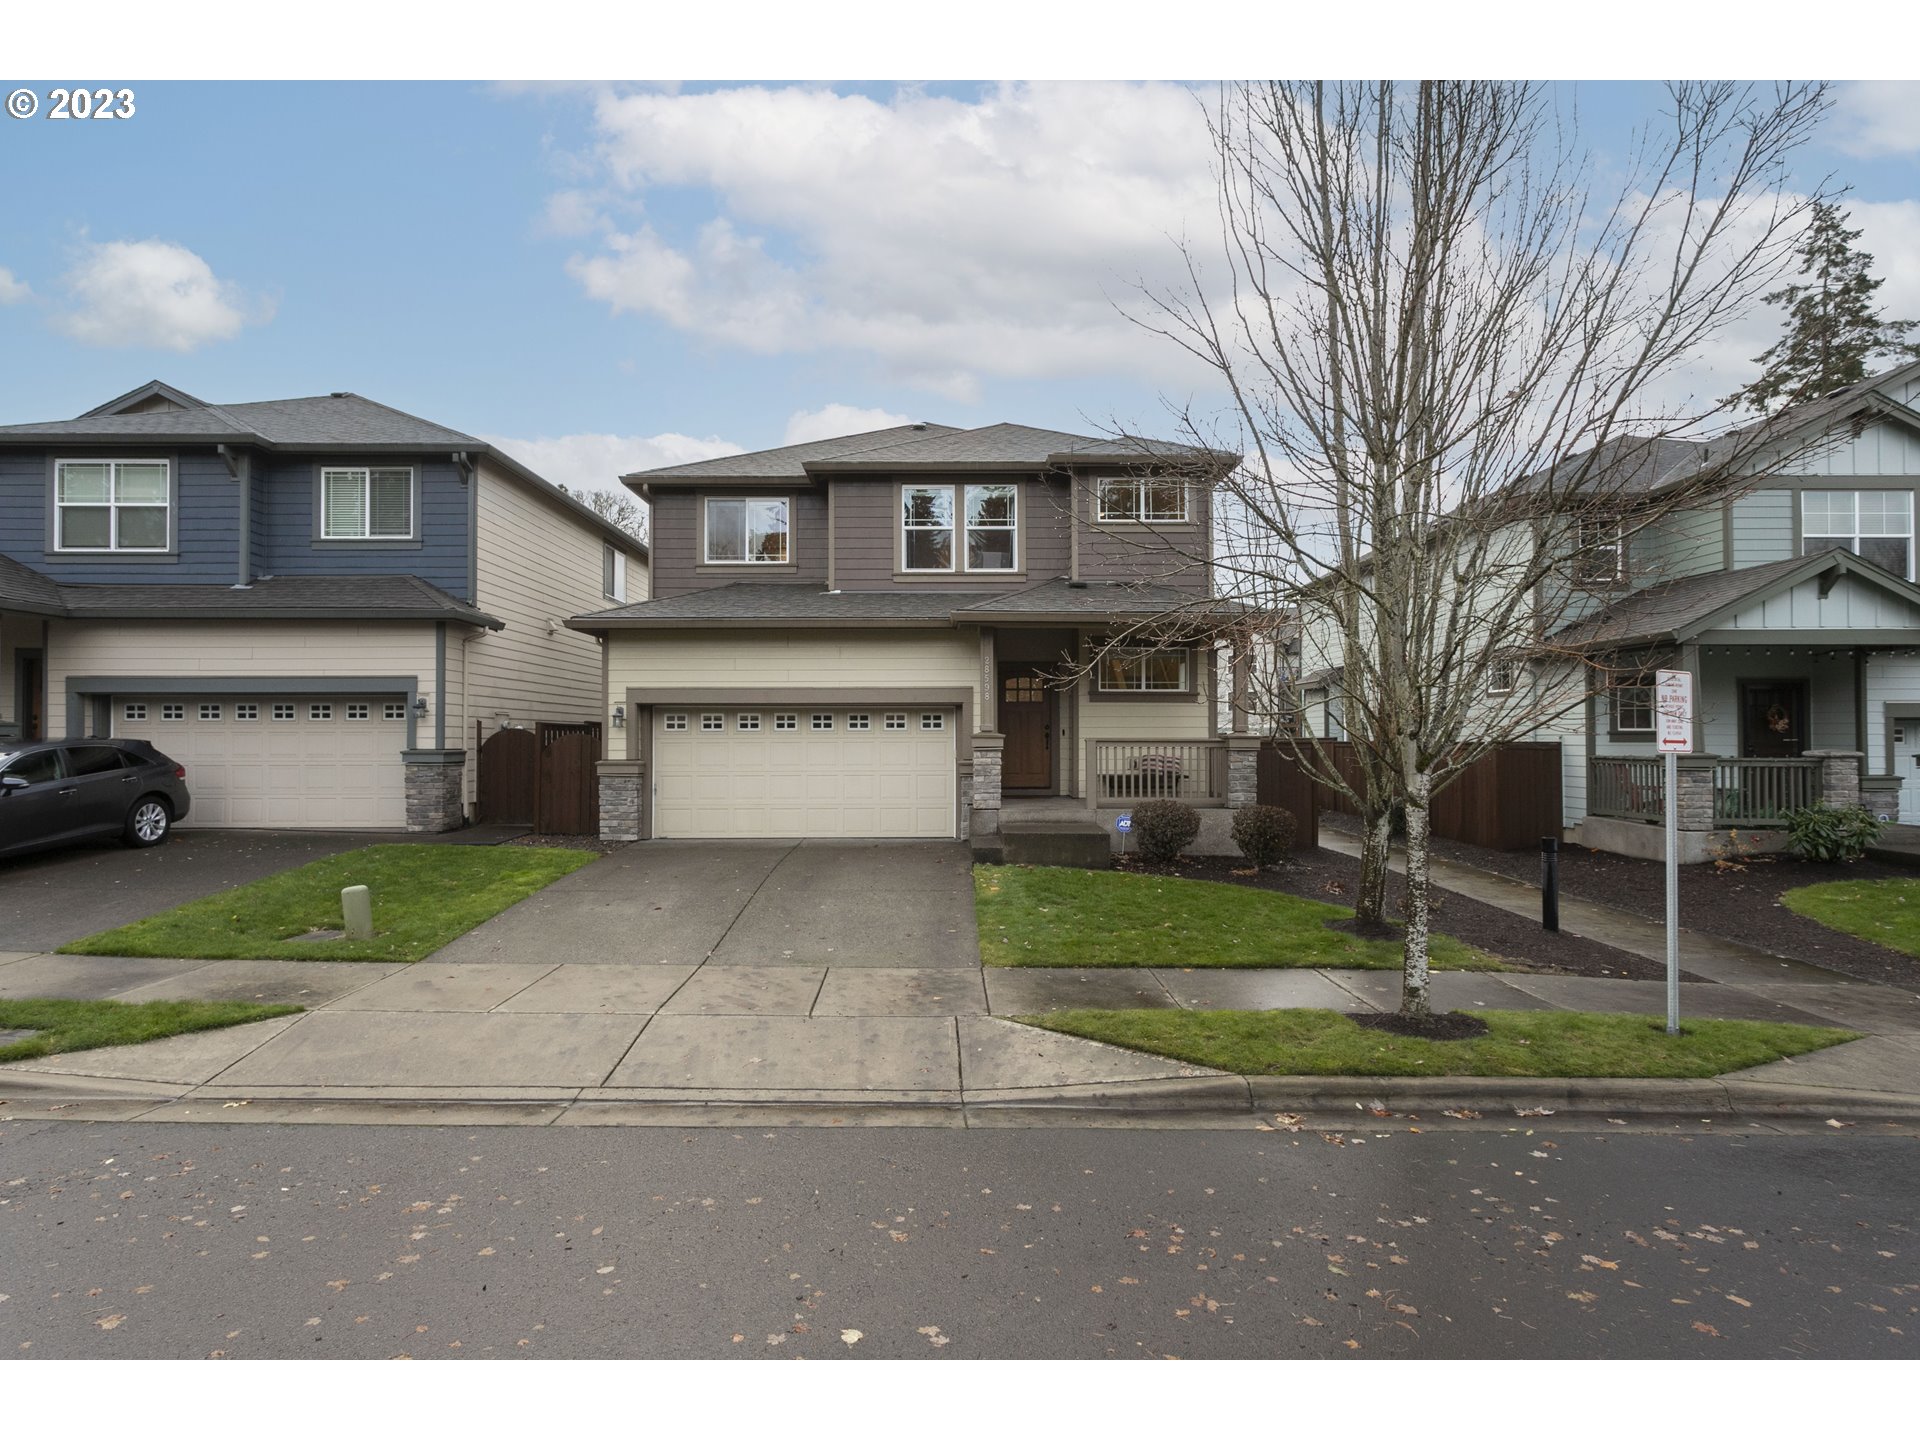 28598 GREENWAY DR, Wilsonville, OR 97070